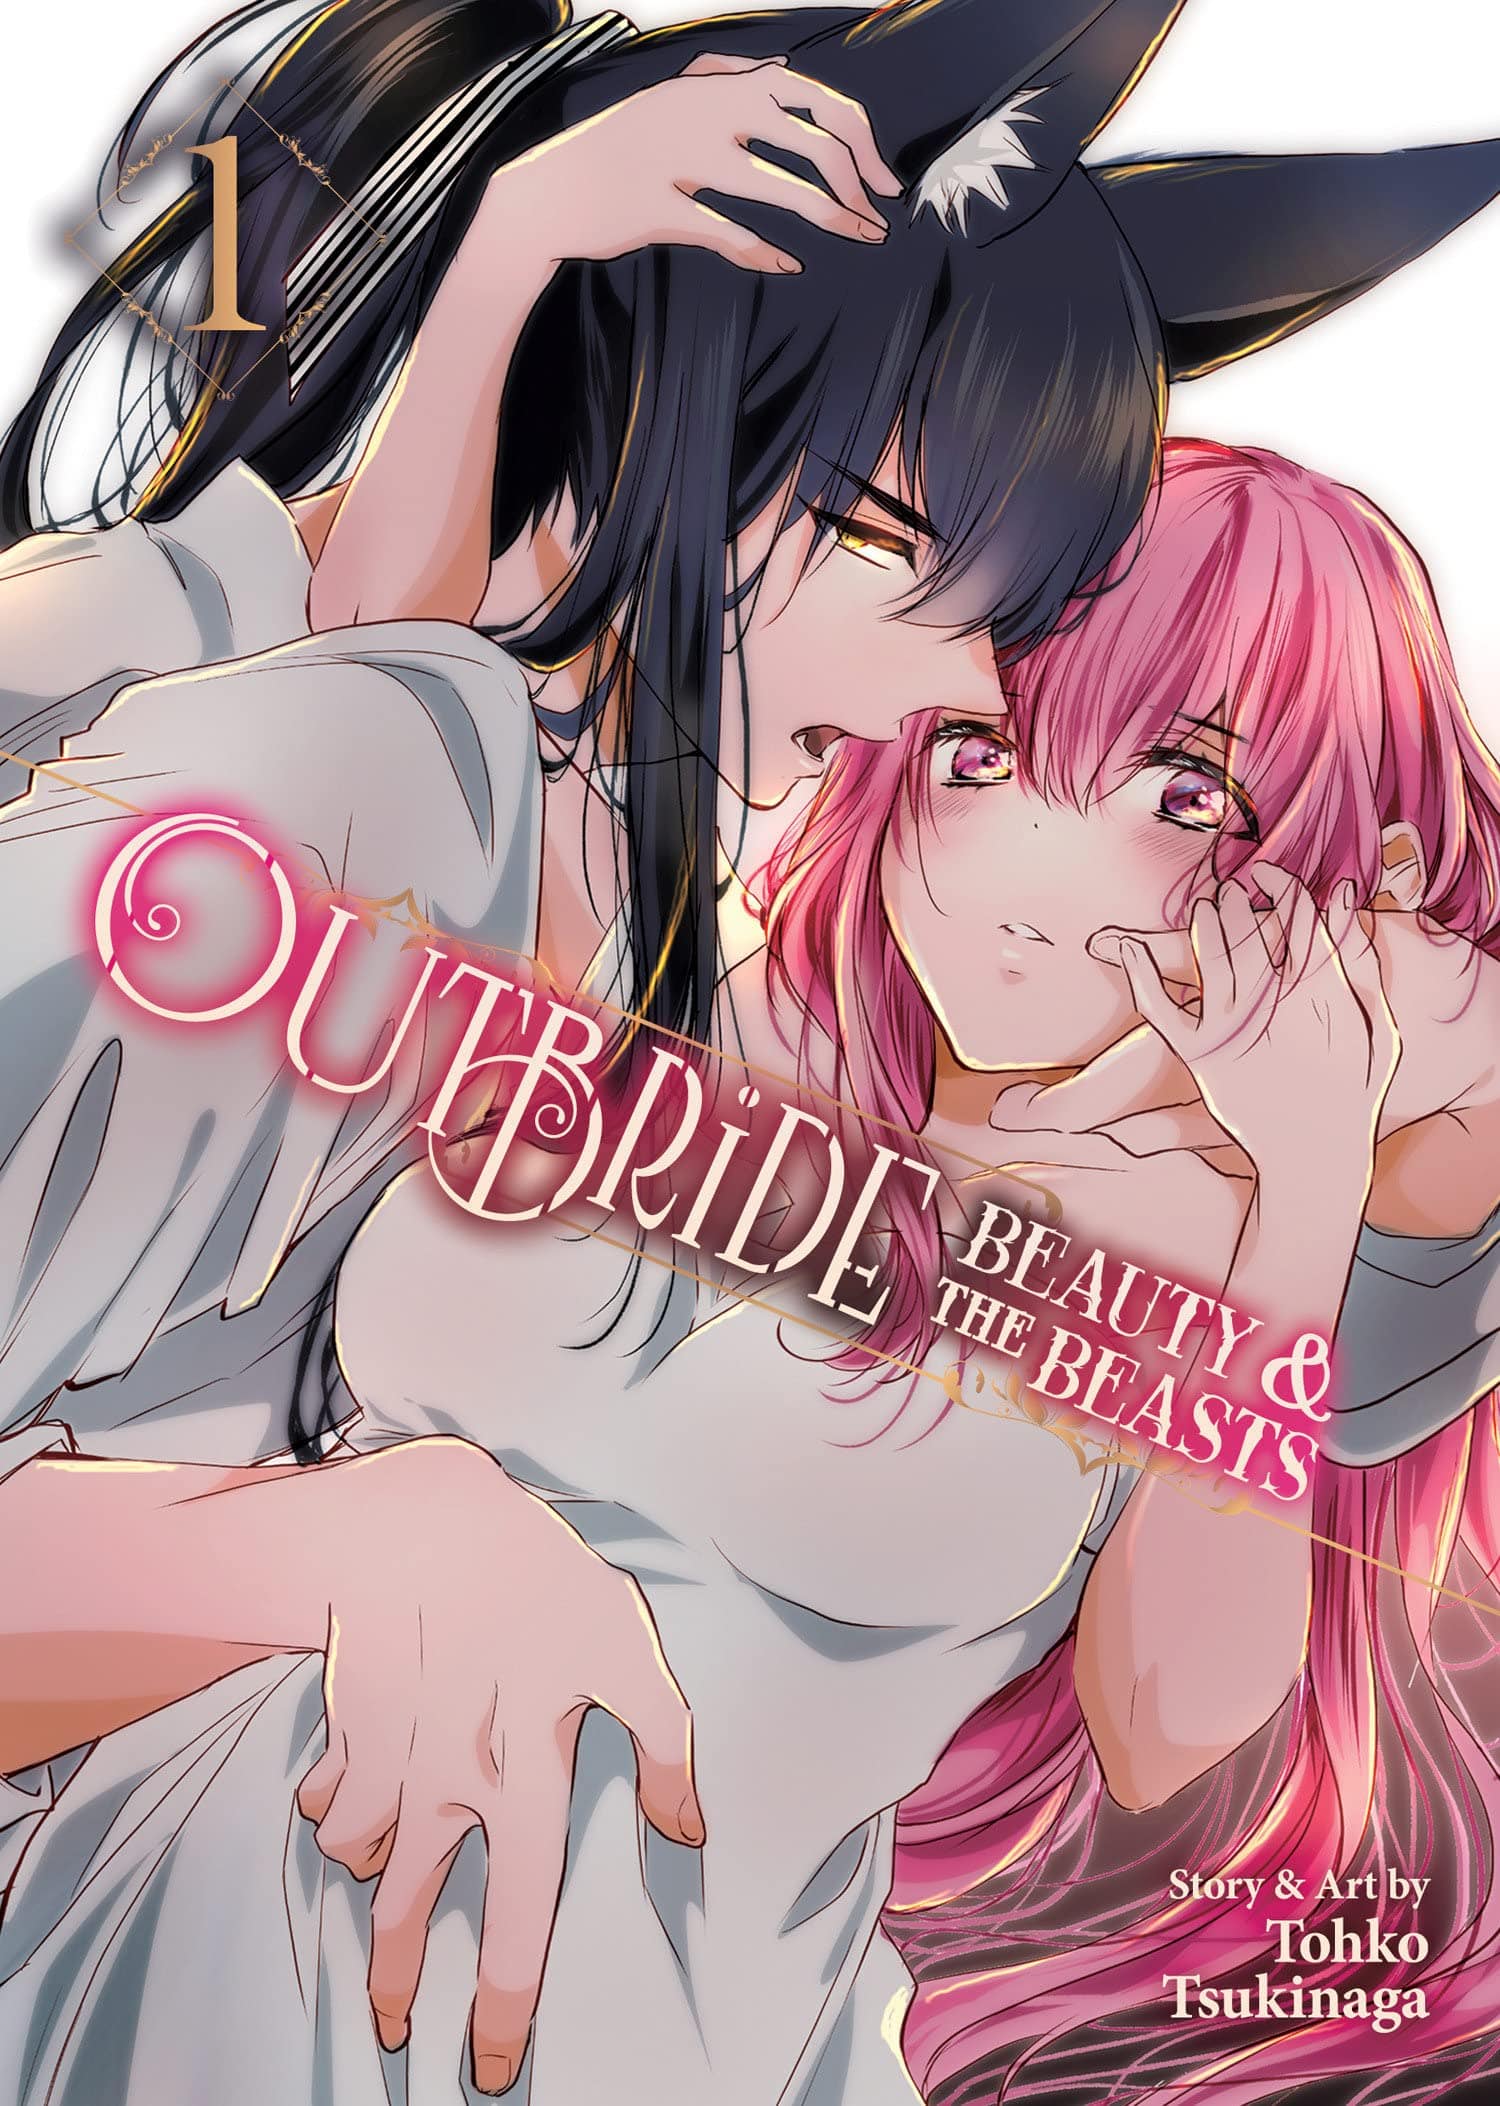 Outbride: Beauty and the Beasts Vol. 1 - Third Eye